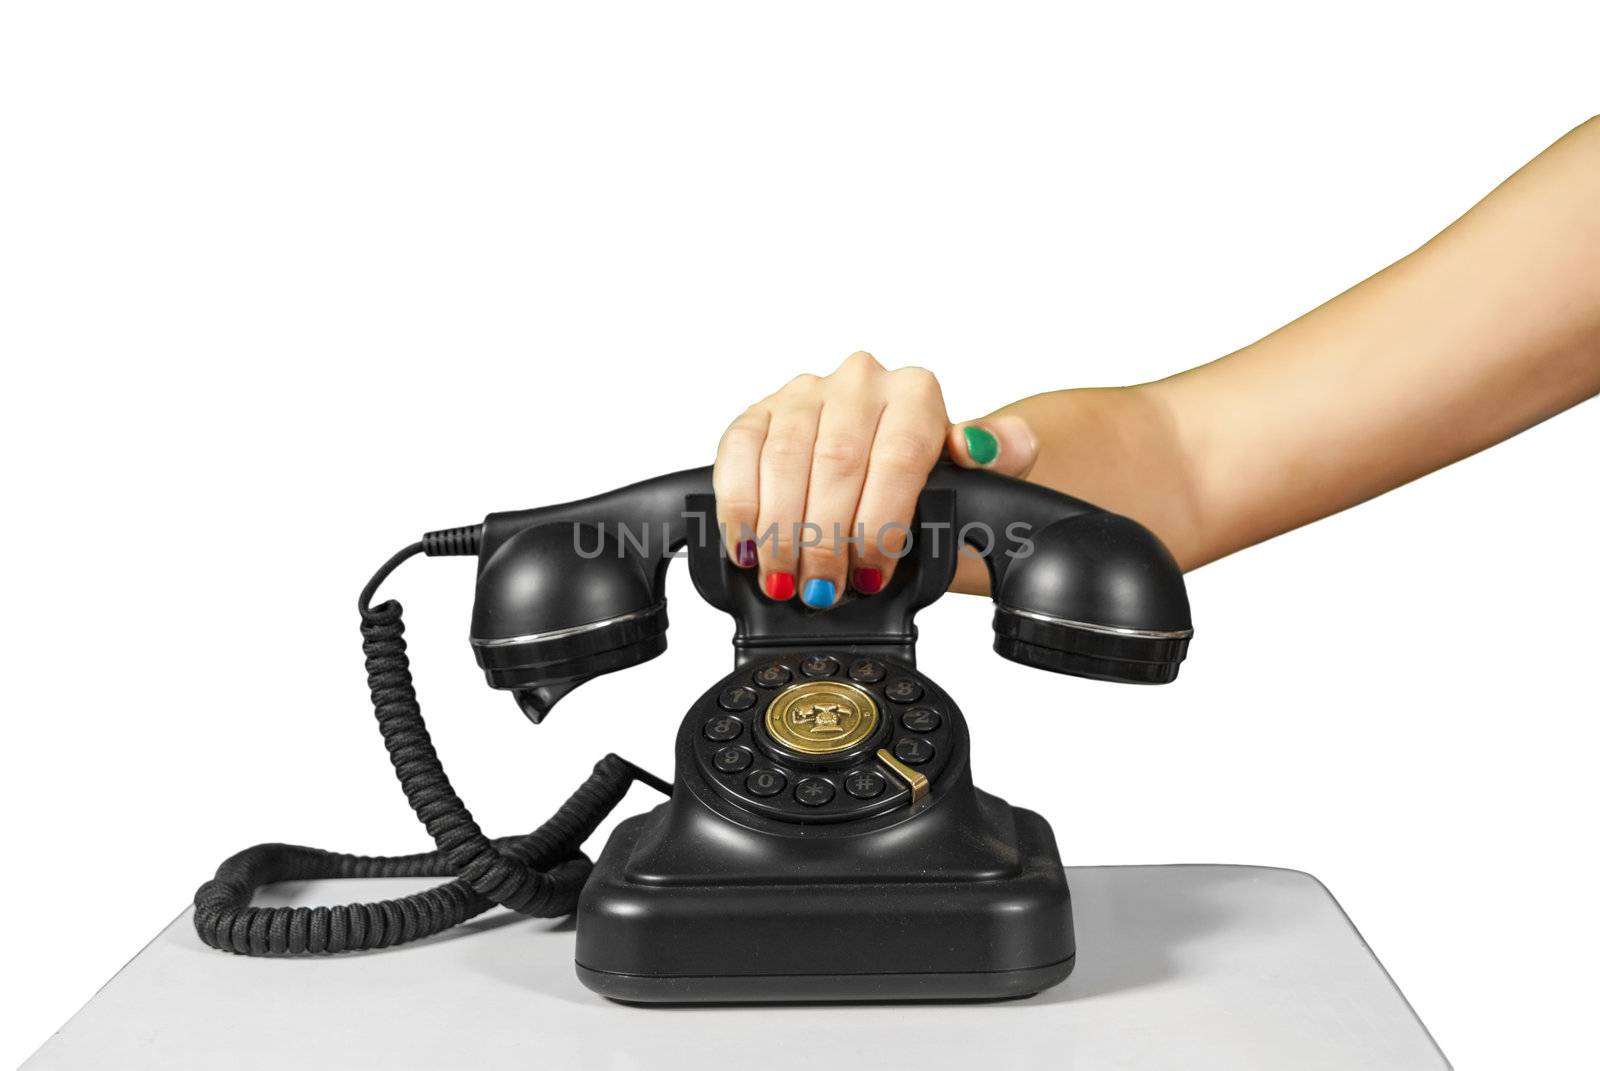 A hand holding the handset of an old black vintage rotary style telephone isolated over white.